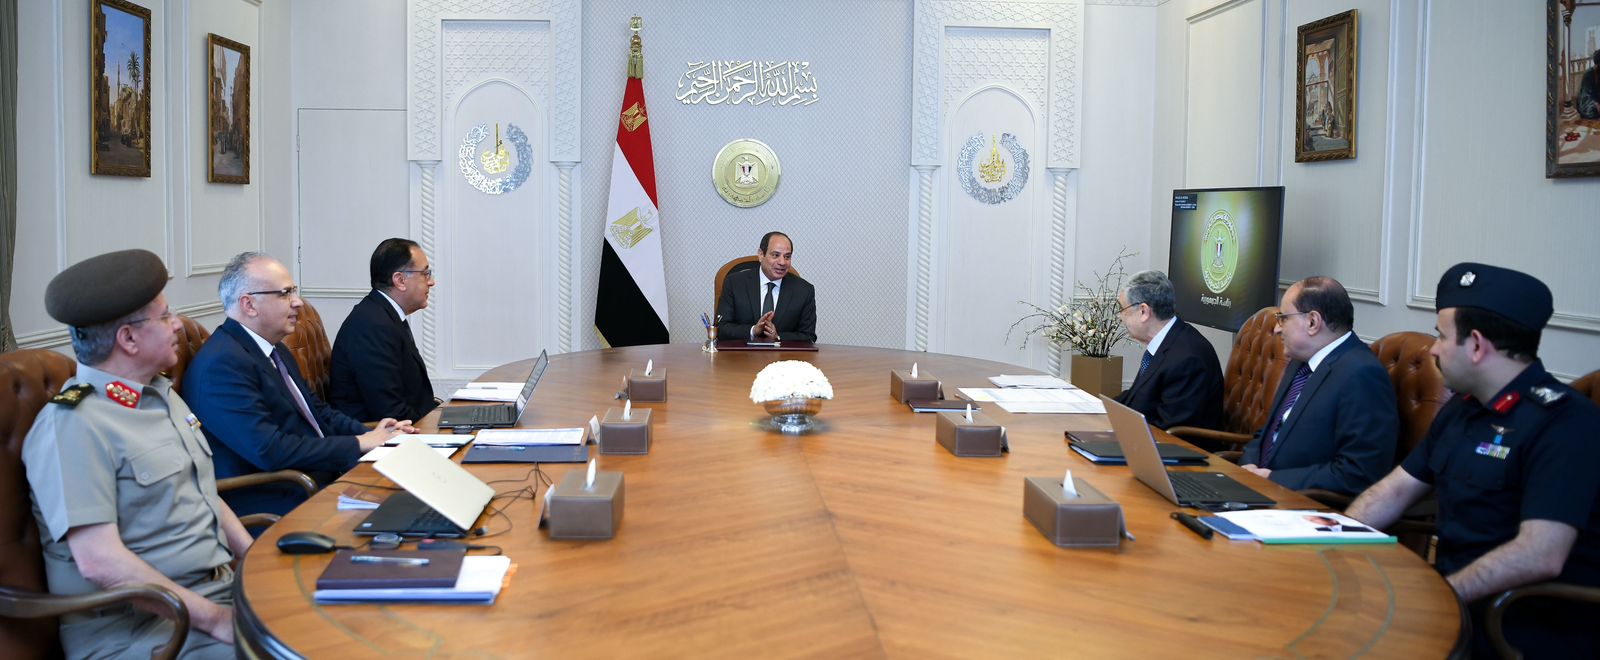 President Sisi meets with the Prime Minister and a number of ministers to follow up on providing the necessary needs for facilities and services